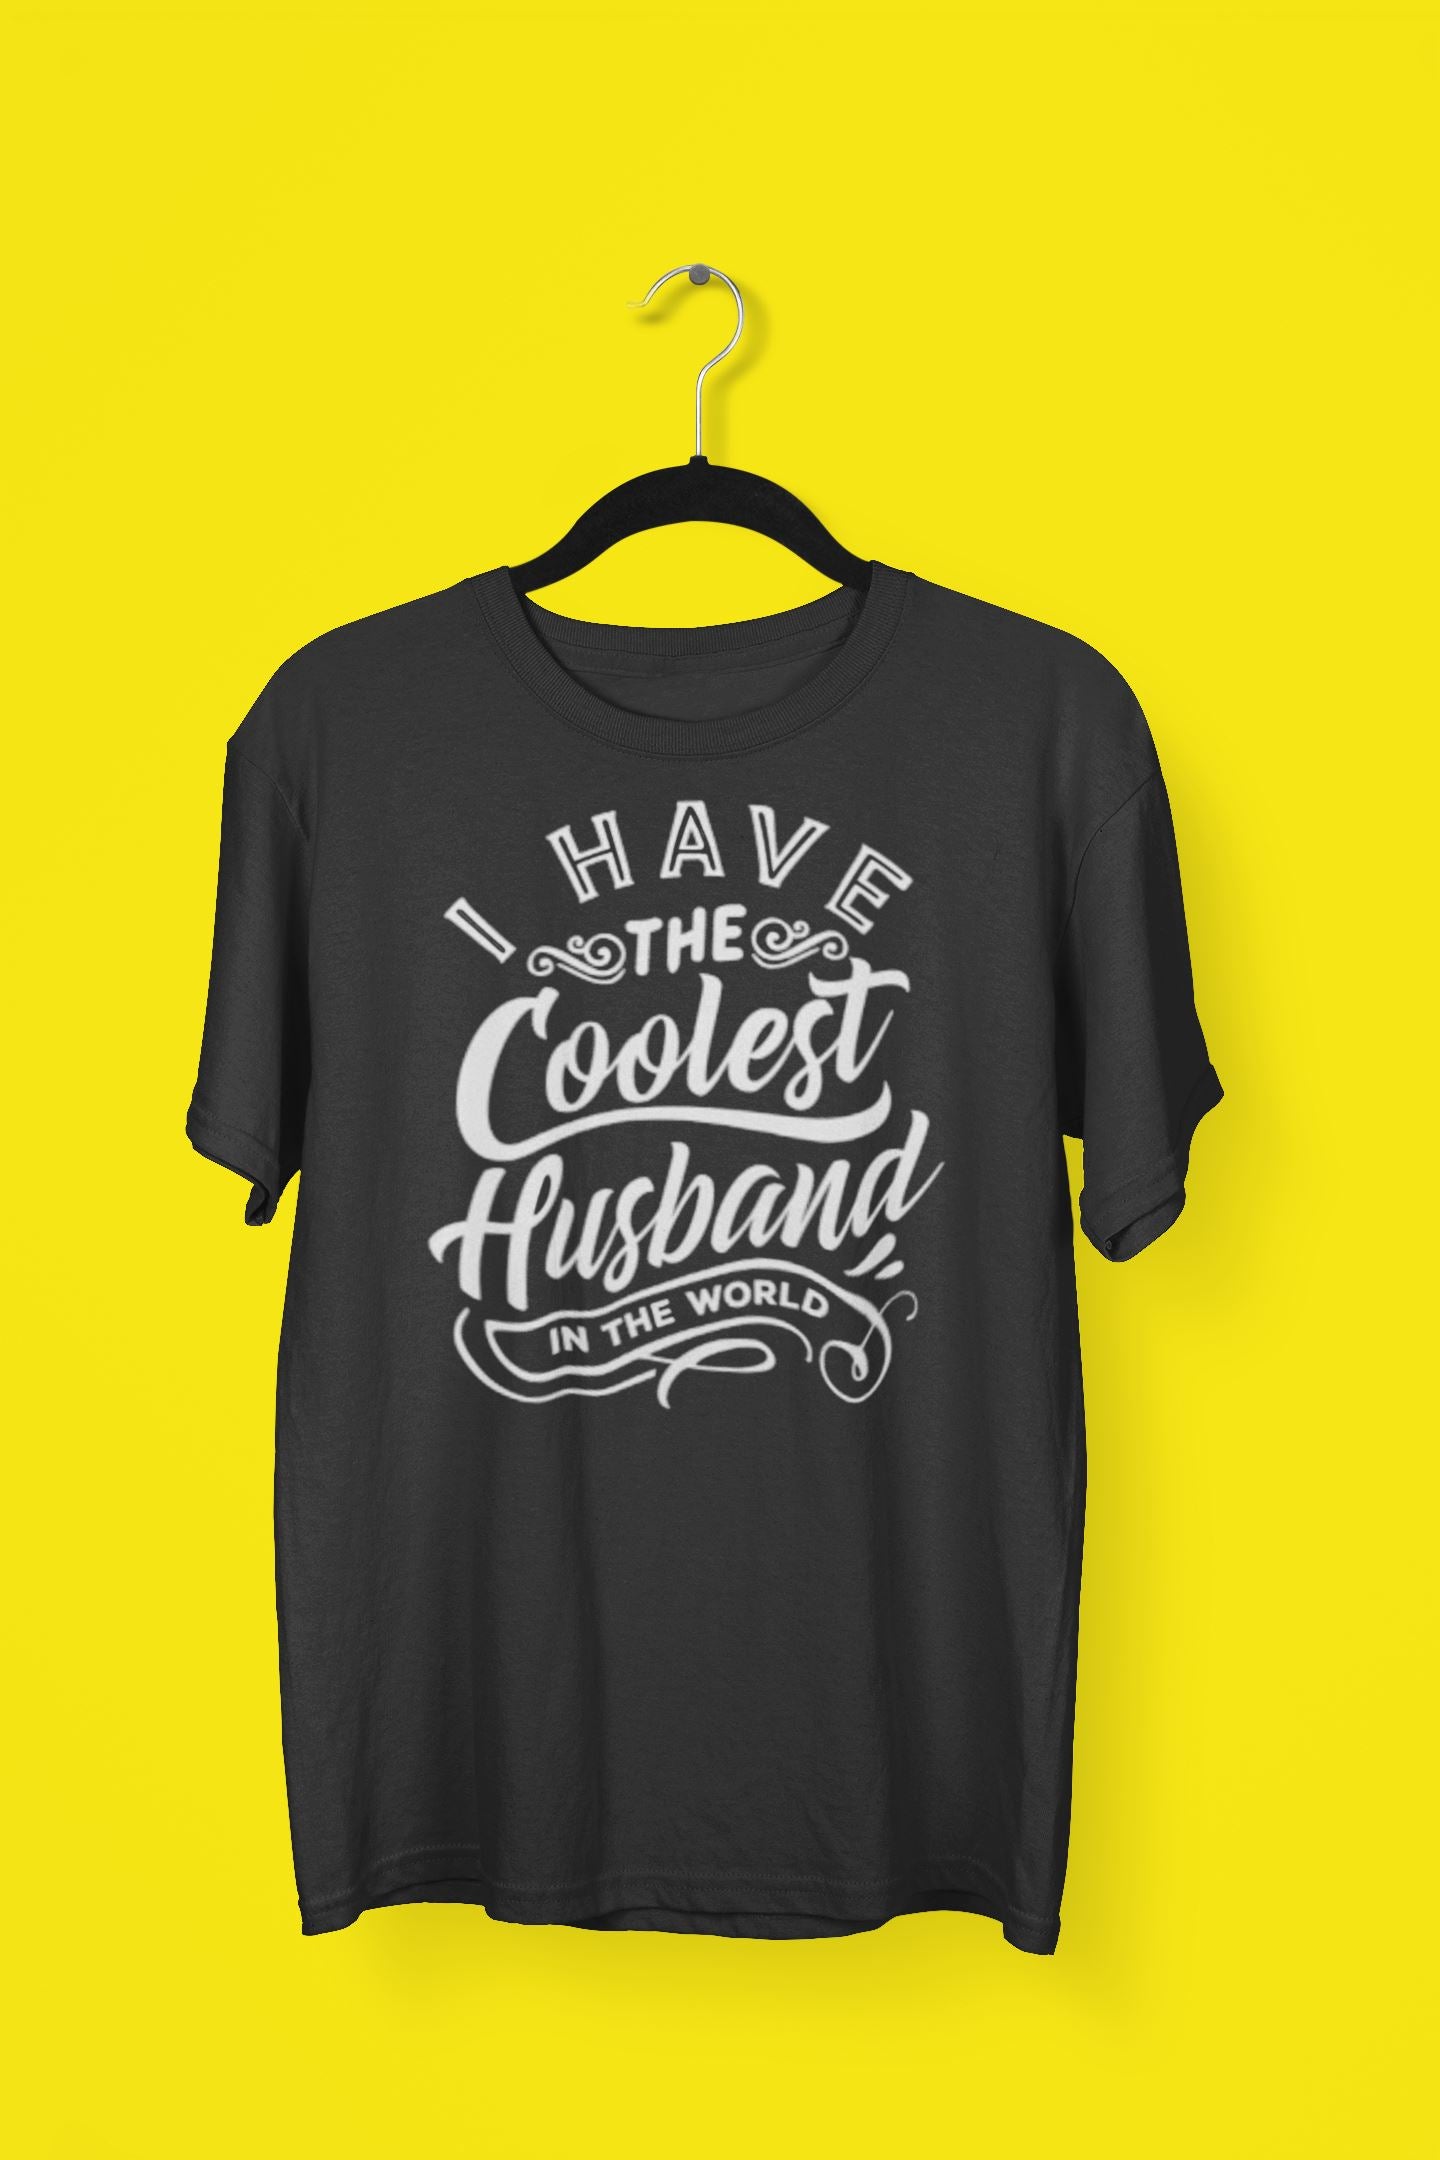 I have the Coolest Husband Exclusive Black T Shirt for Women freeshipping - Catch My Drift India